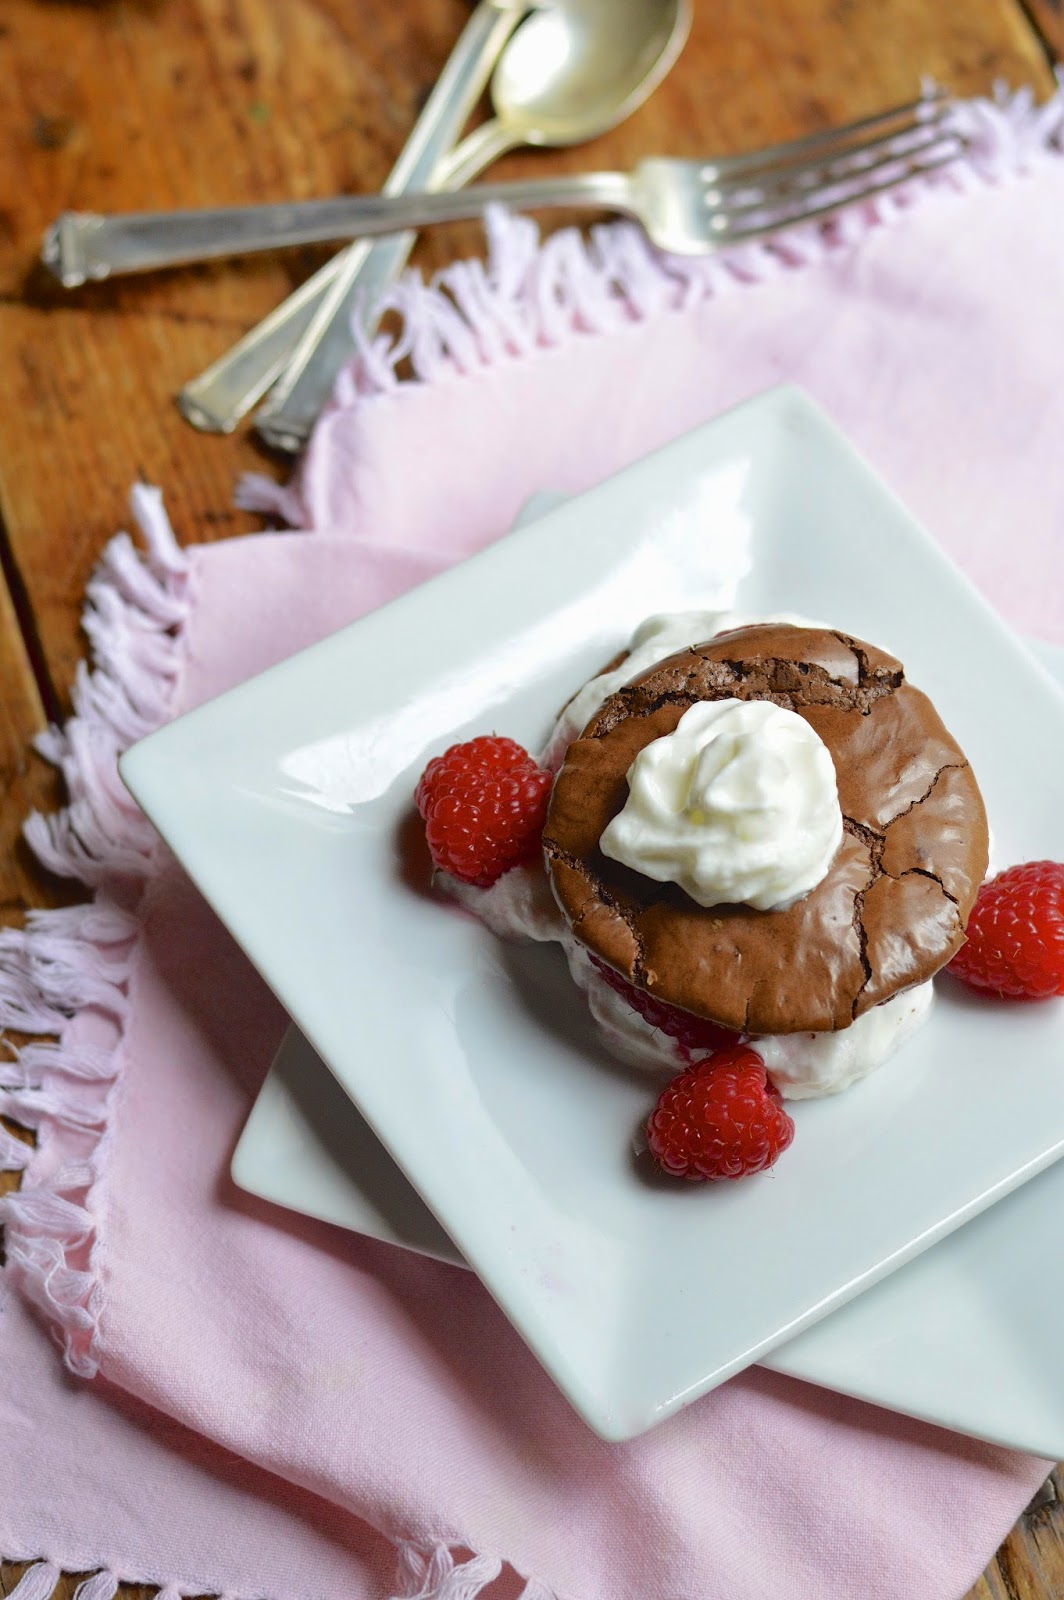 Chocolate Raspberry Shortcakes - a twist on the classic and stacked with gluten free chocolate cookies.